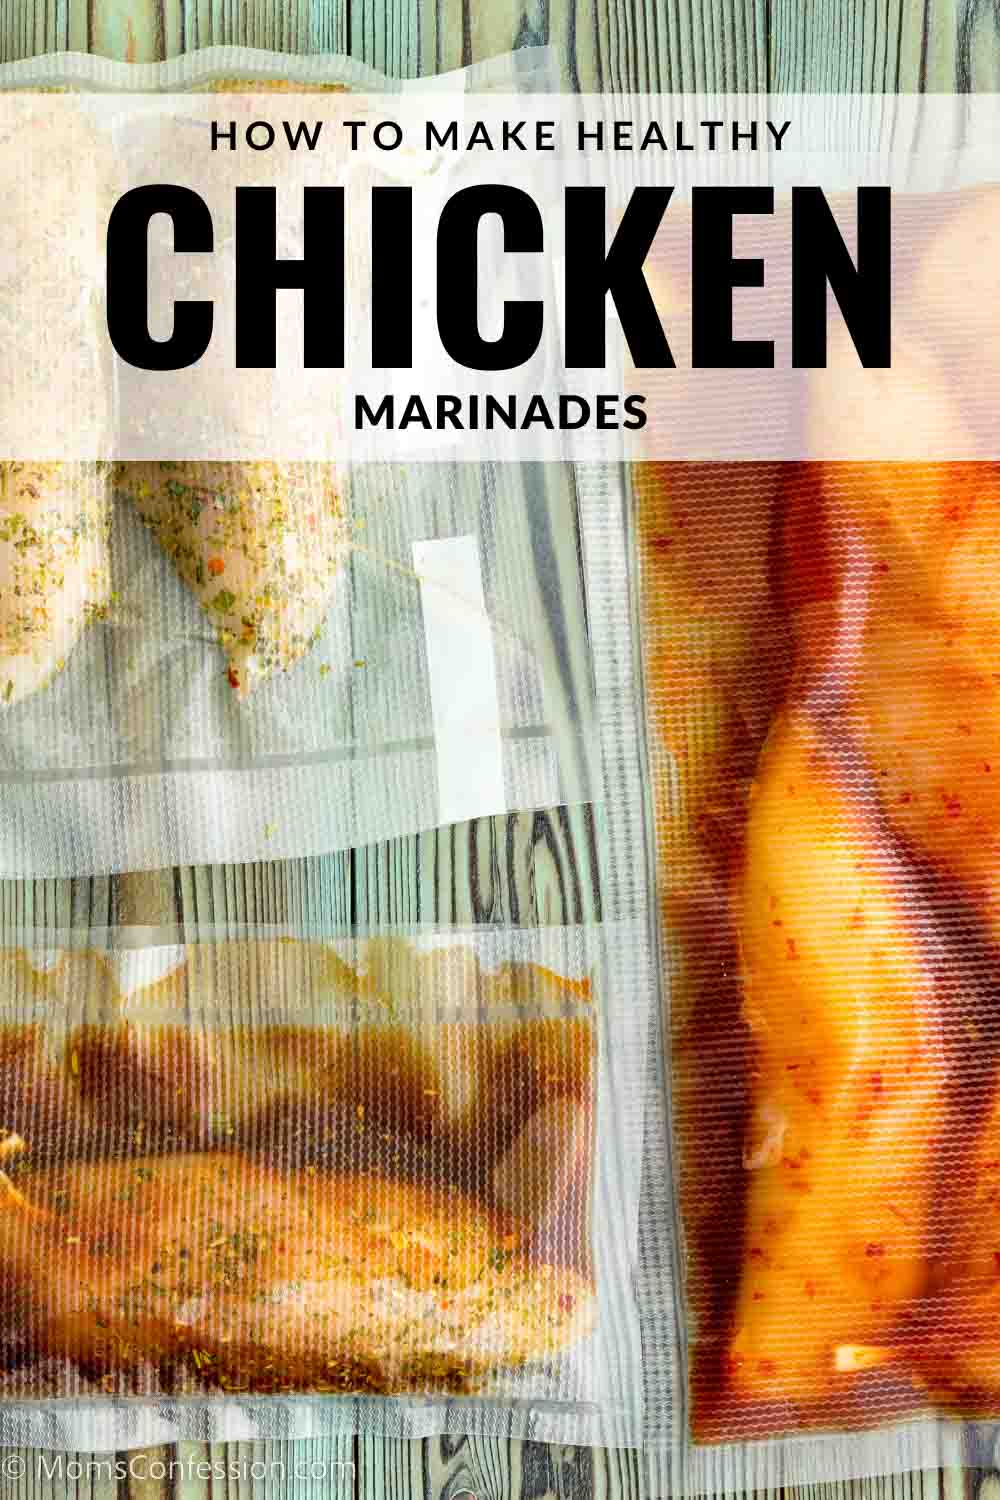 https://www.momsconfession.com/wp-content/uploads/2023/06/How-to-Make-Healthy-Chicken-Marinades.jpg